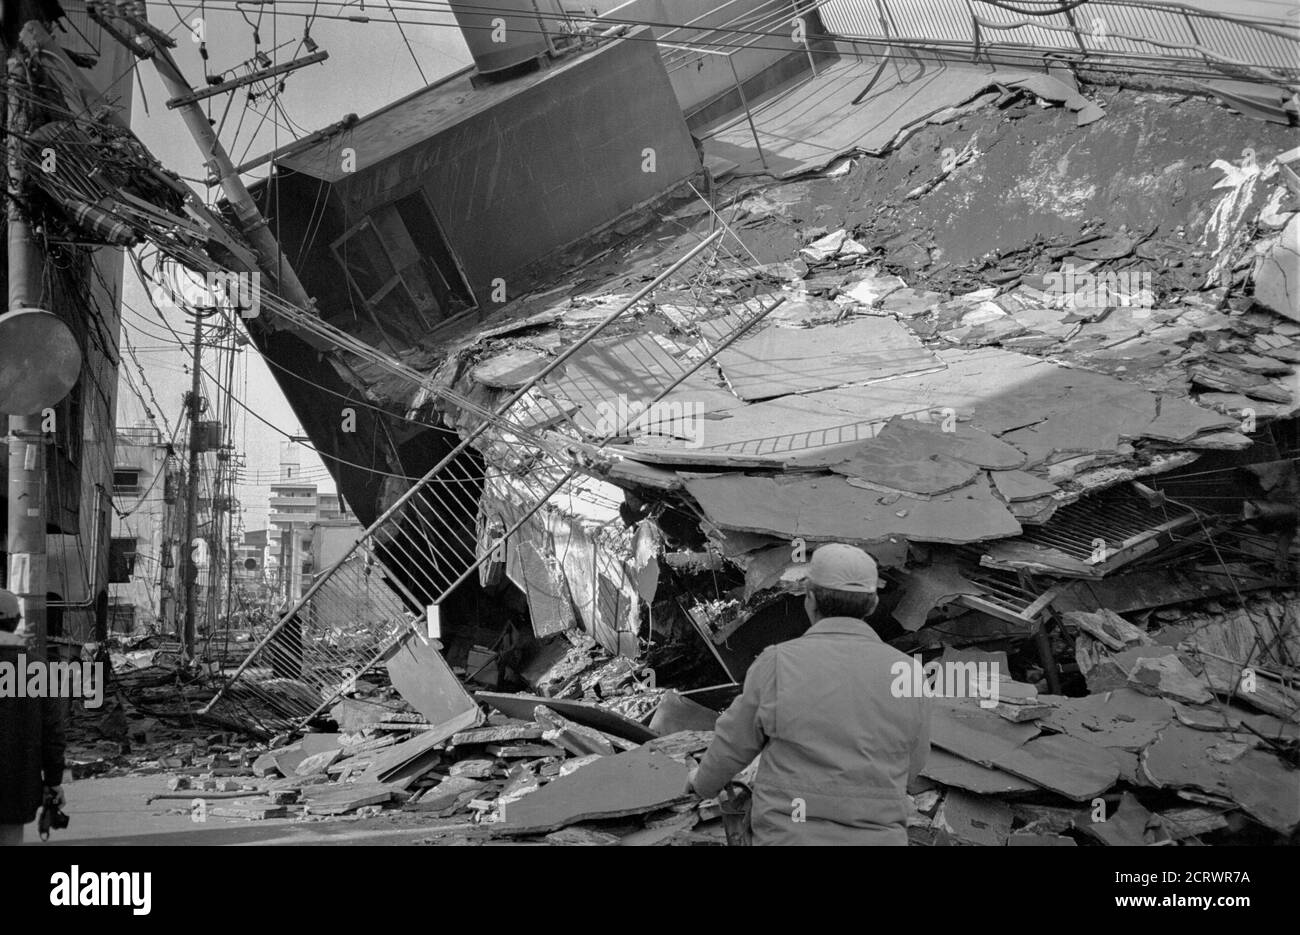 Man stops and looks upon collapsed building from the damage caused by the 1995 Great Hanshin Earthquake in Kobe, Japan Stock Photo